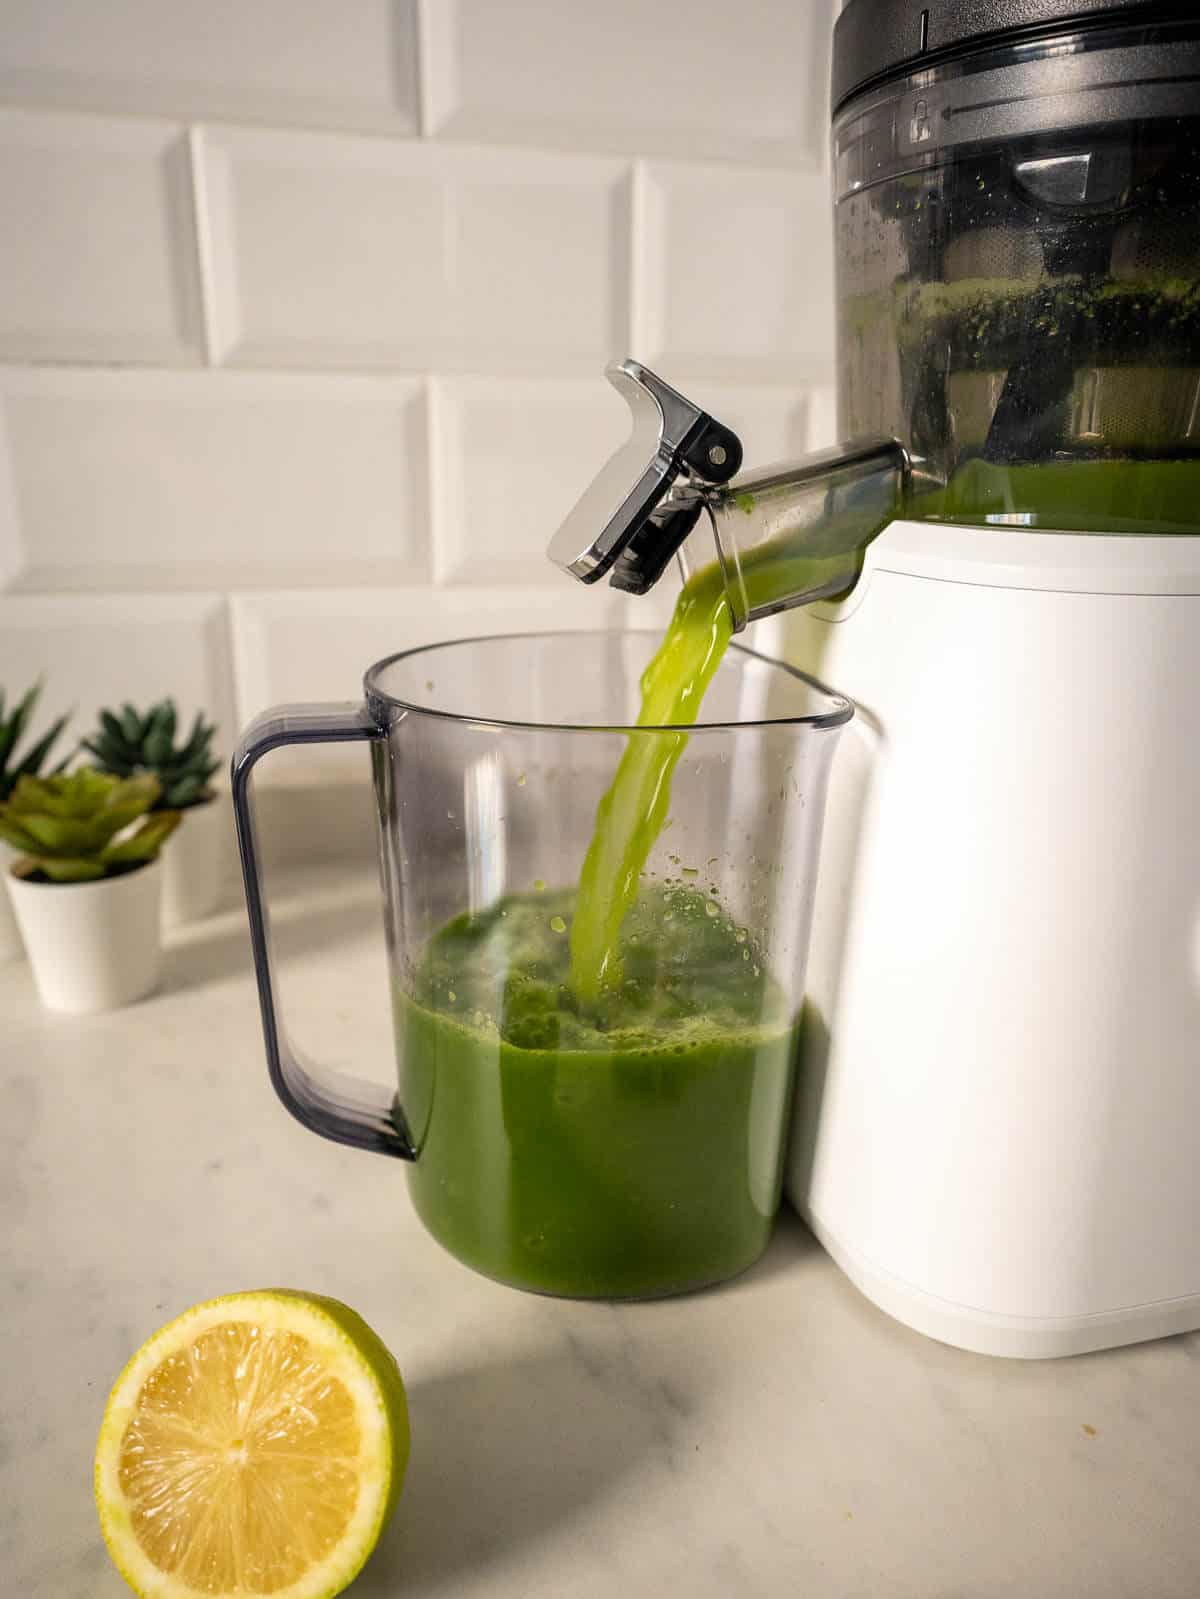 pouring green apple juice from juicer.